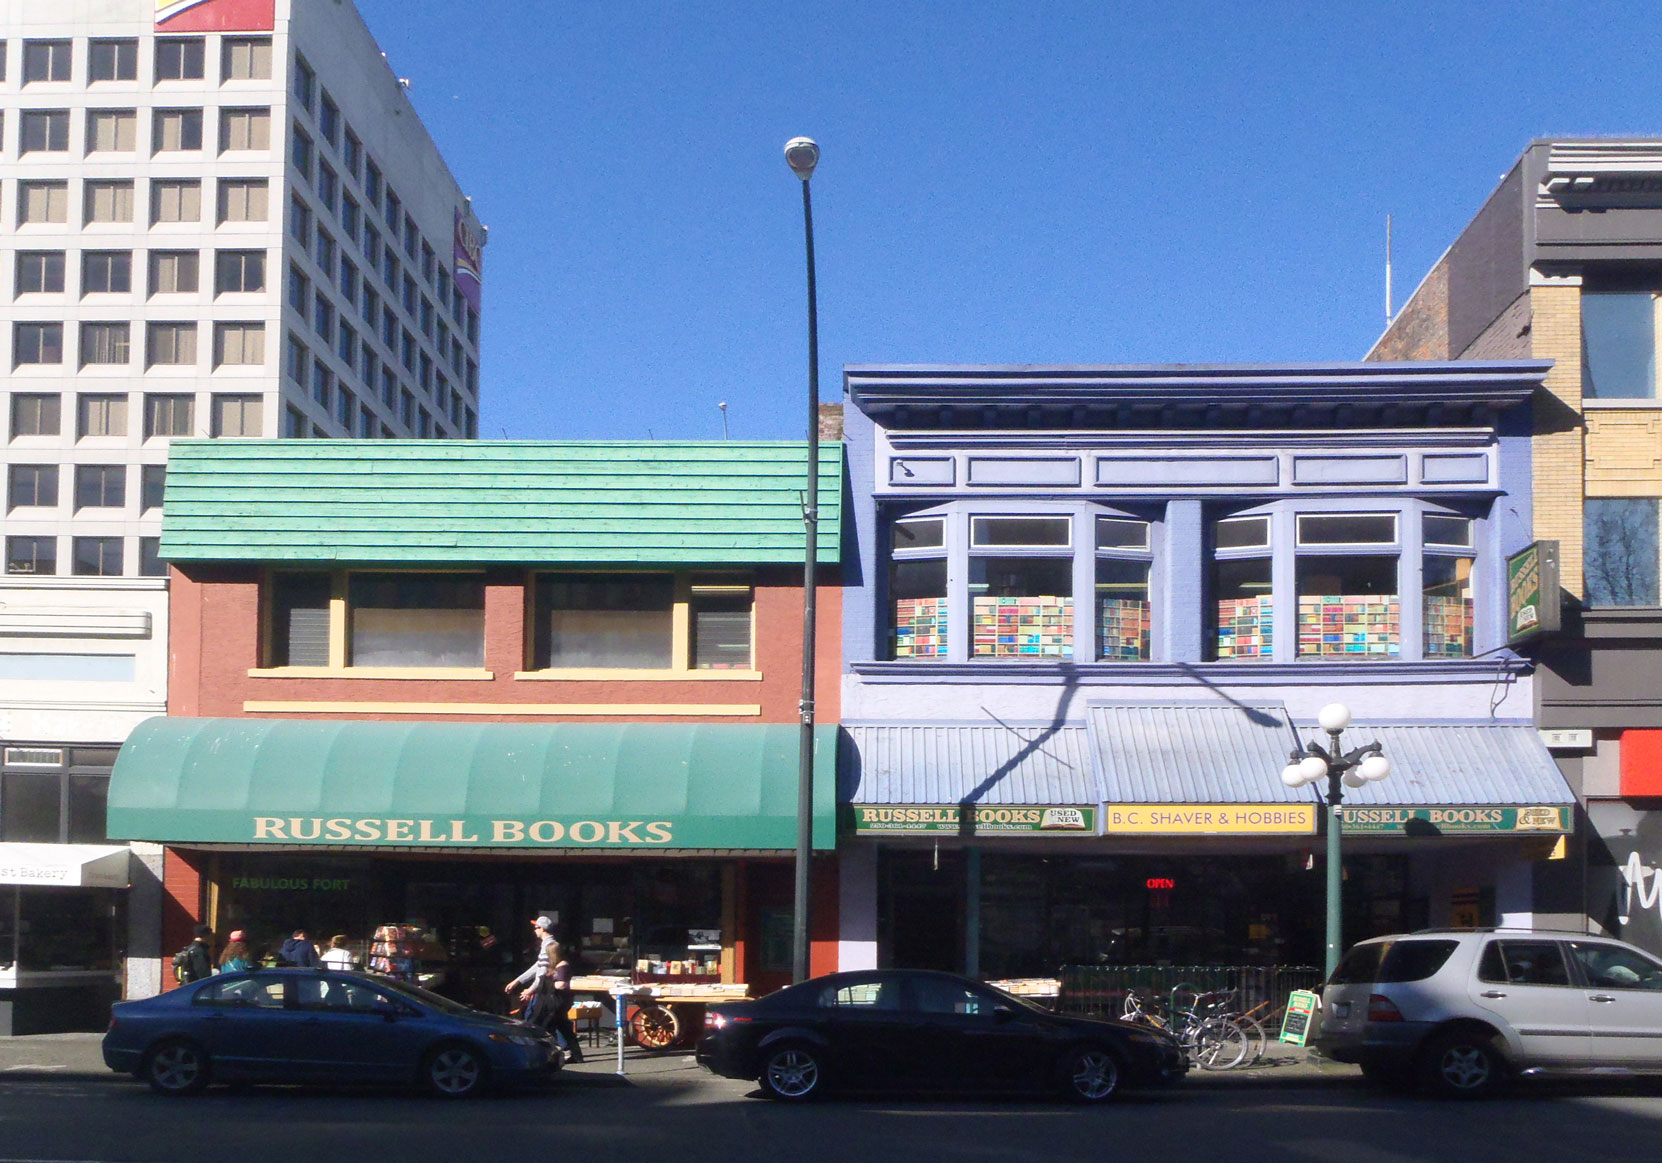 732 Fort Street (left) and 738 Fort Street (right) (photo: Victoria Online Sightseeing Tours)